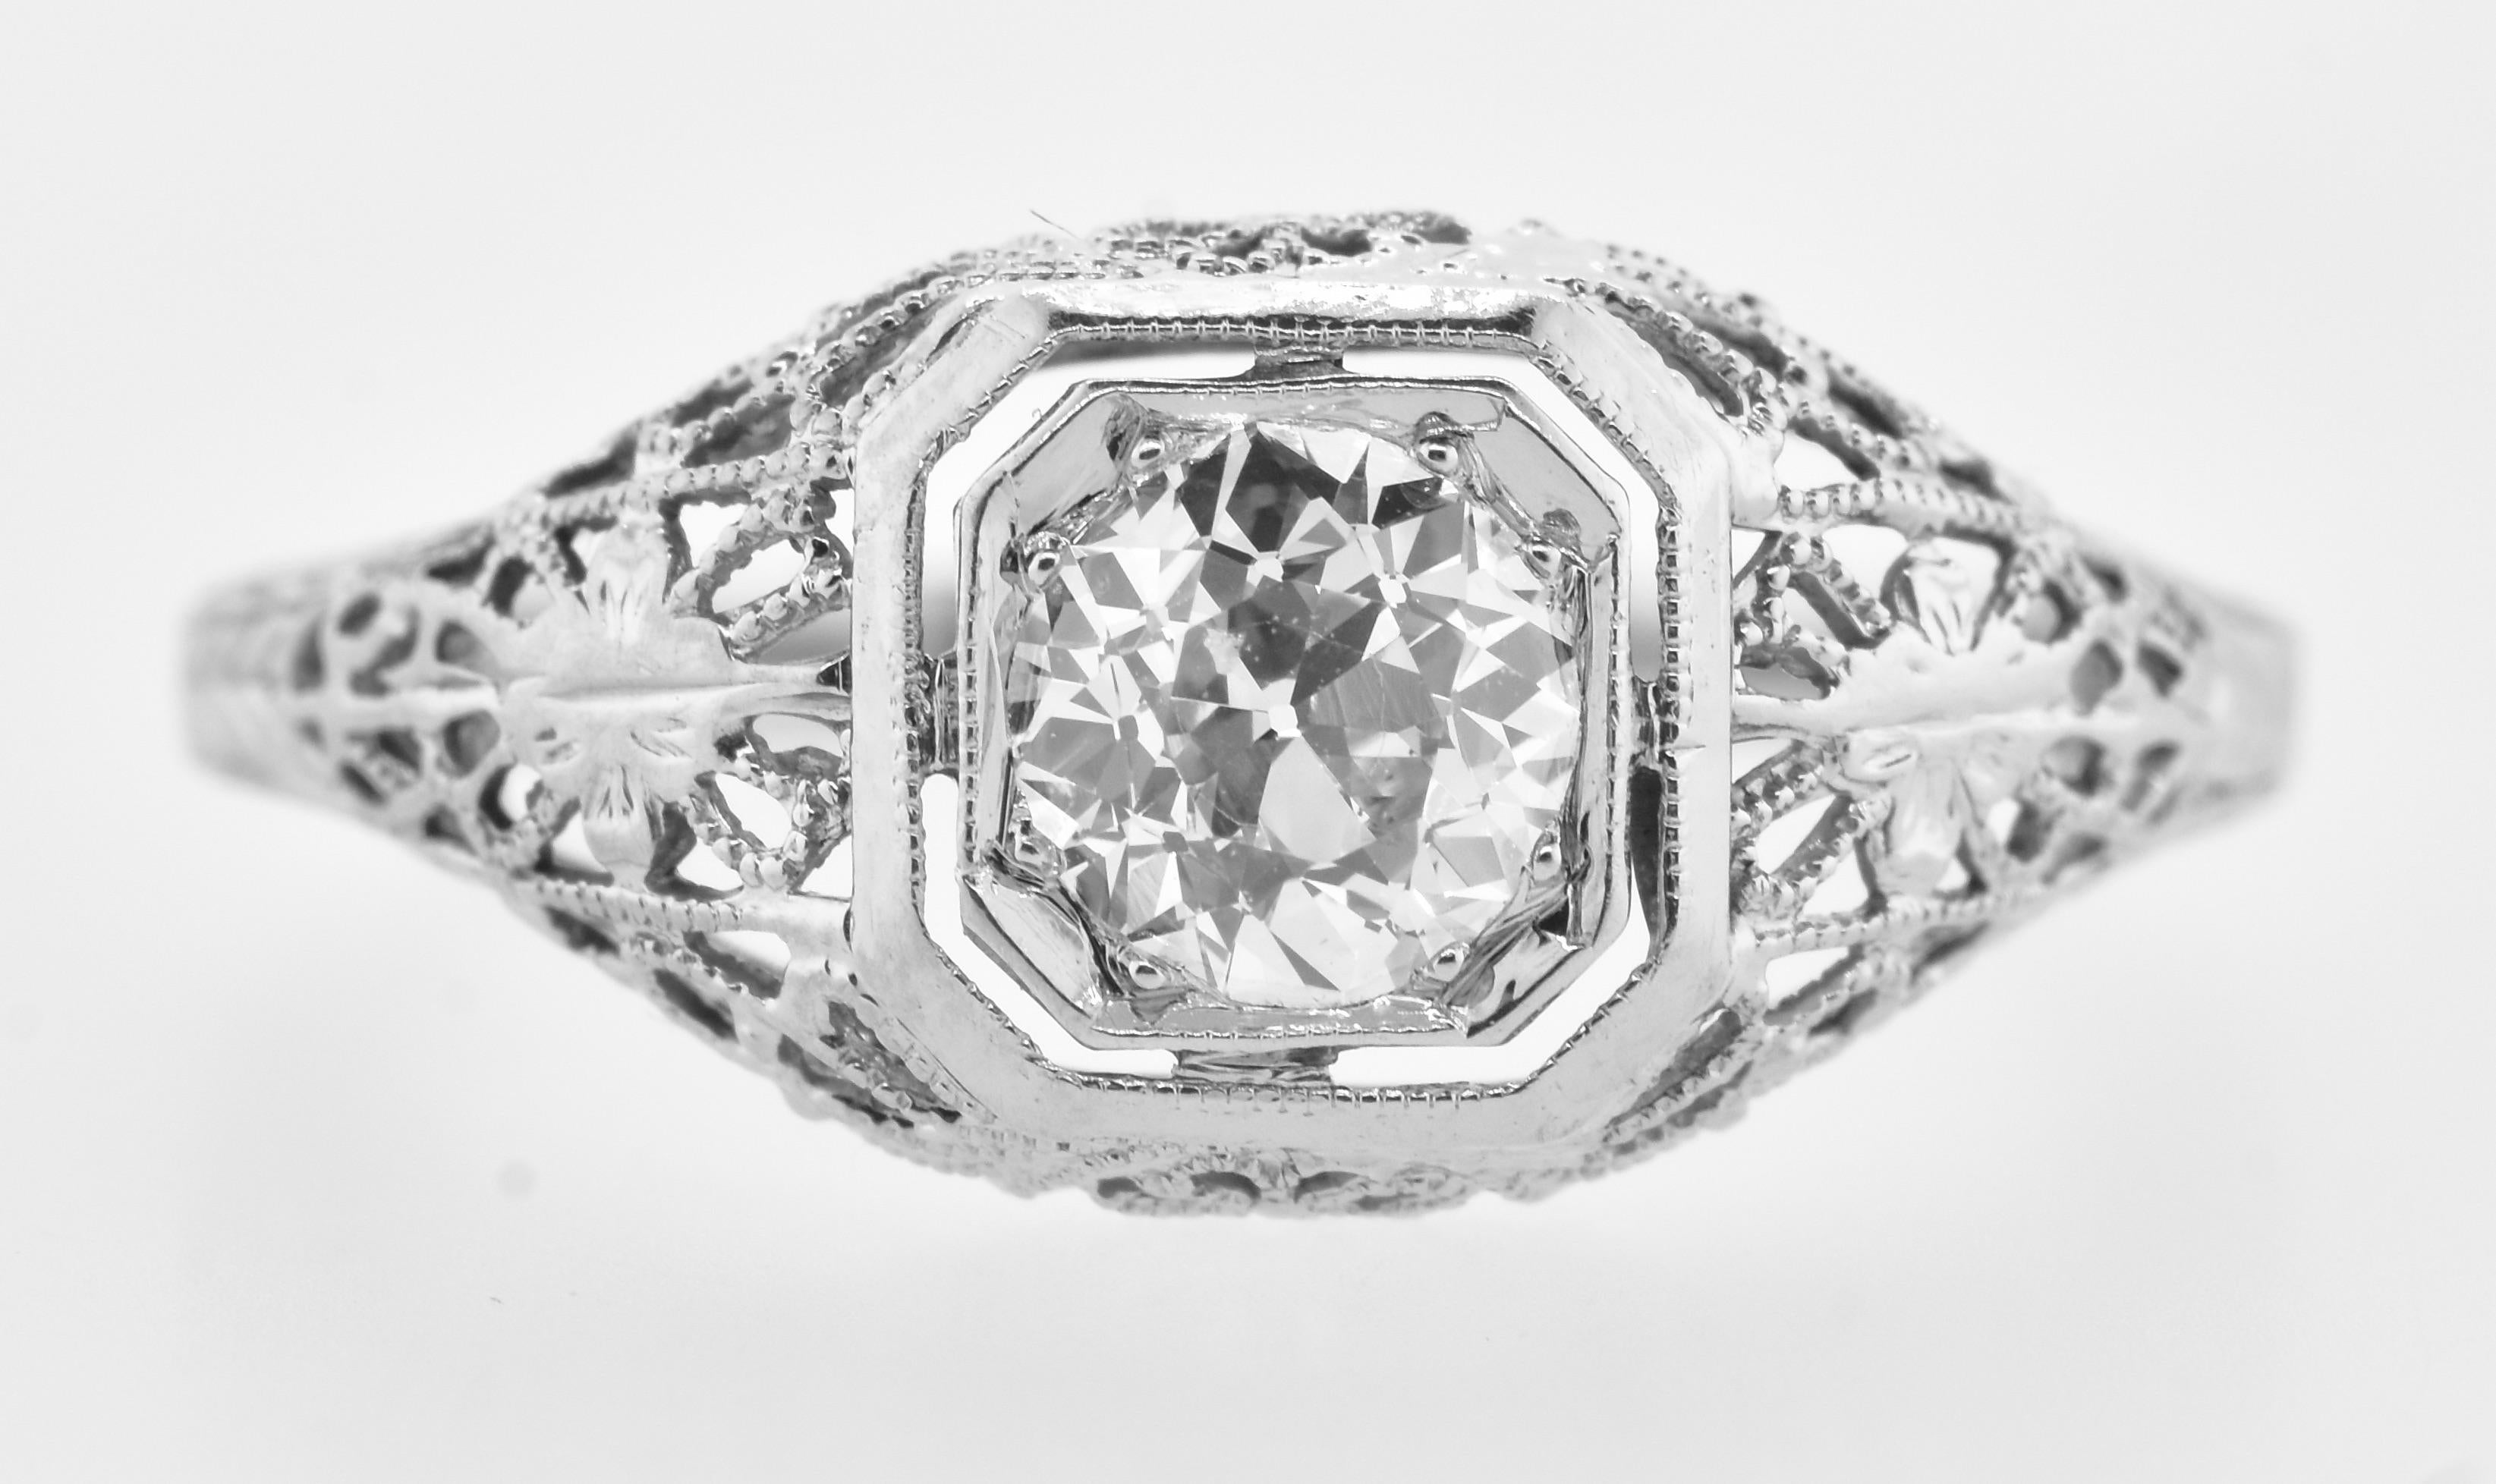 Antique filigree diamond 18K white gold ring.  The center European cut diamond weighs an estimated .65 cts.  It is near colorless (H/I) and very slightly included (VS).  This fine diamond is centered in a fine antique filigree 18K white gold ring. 